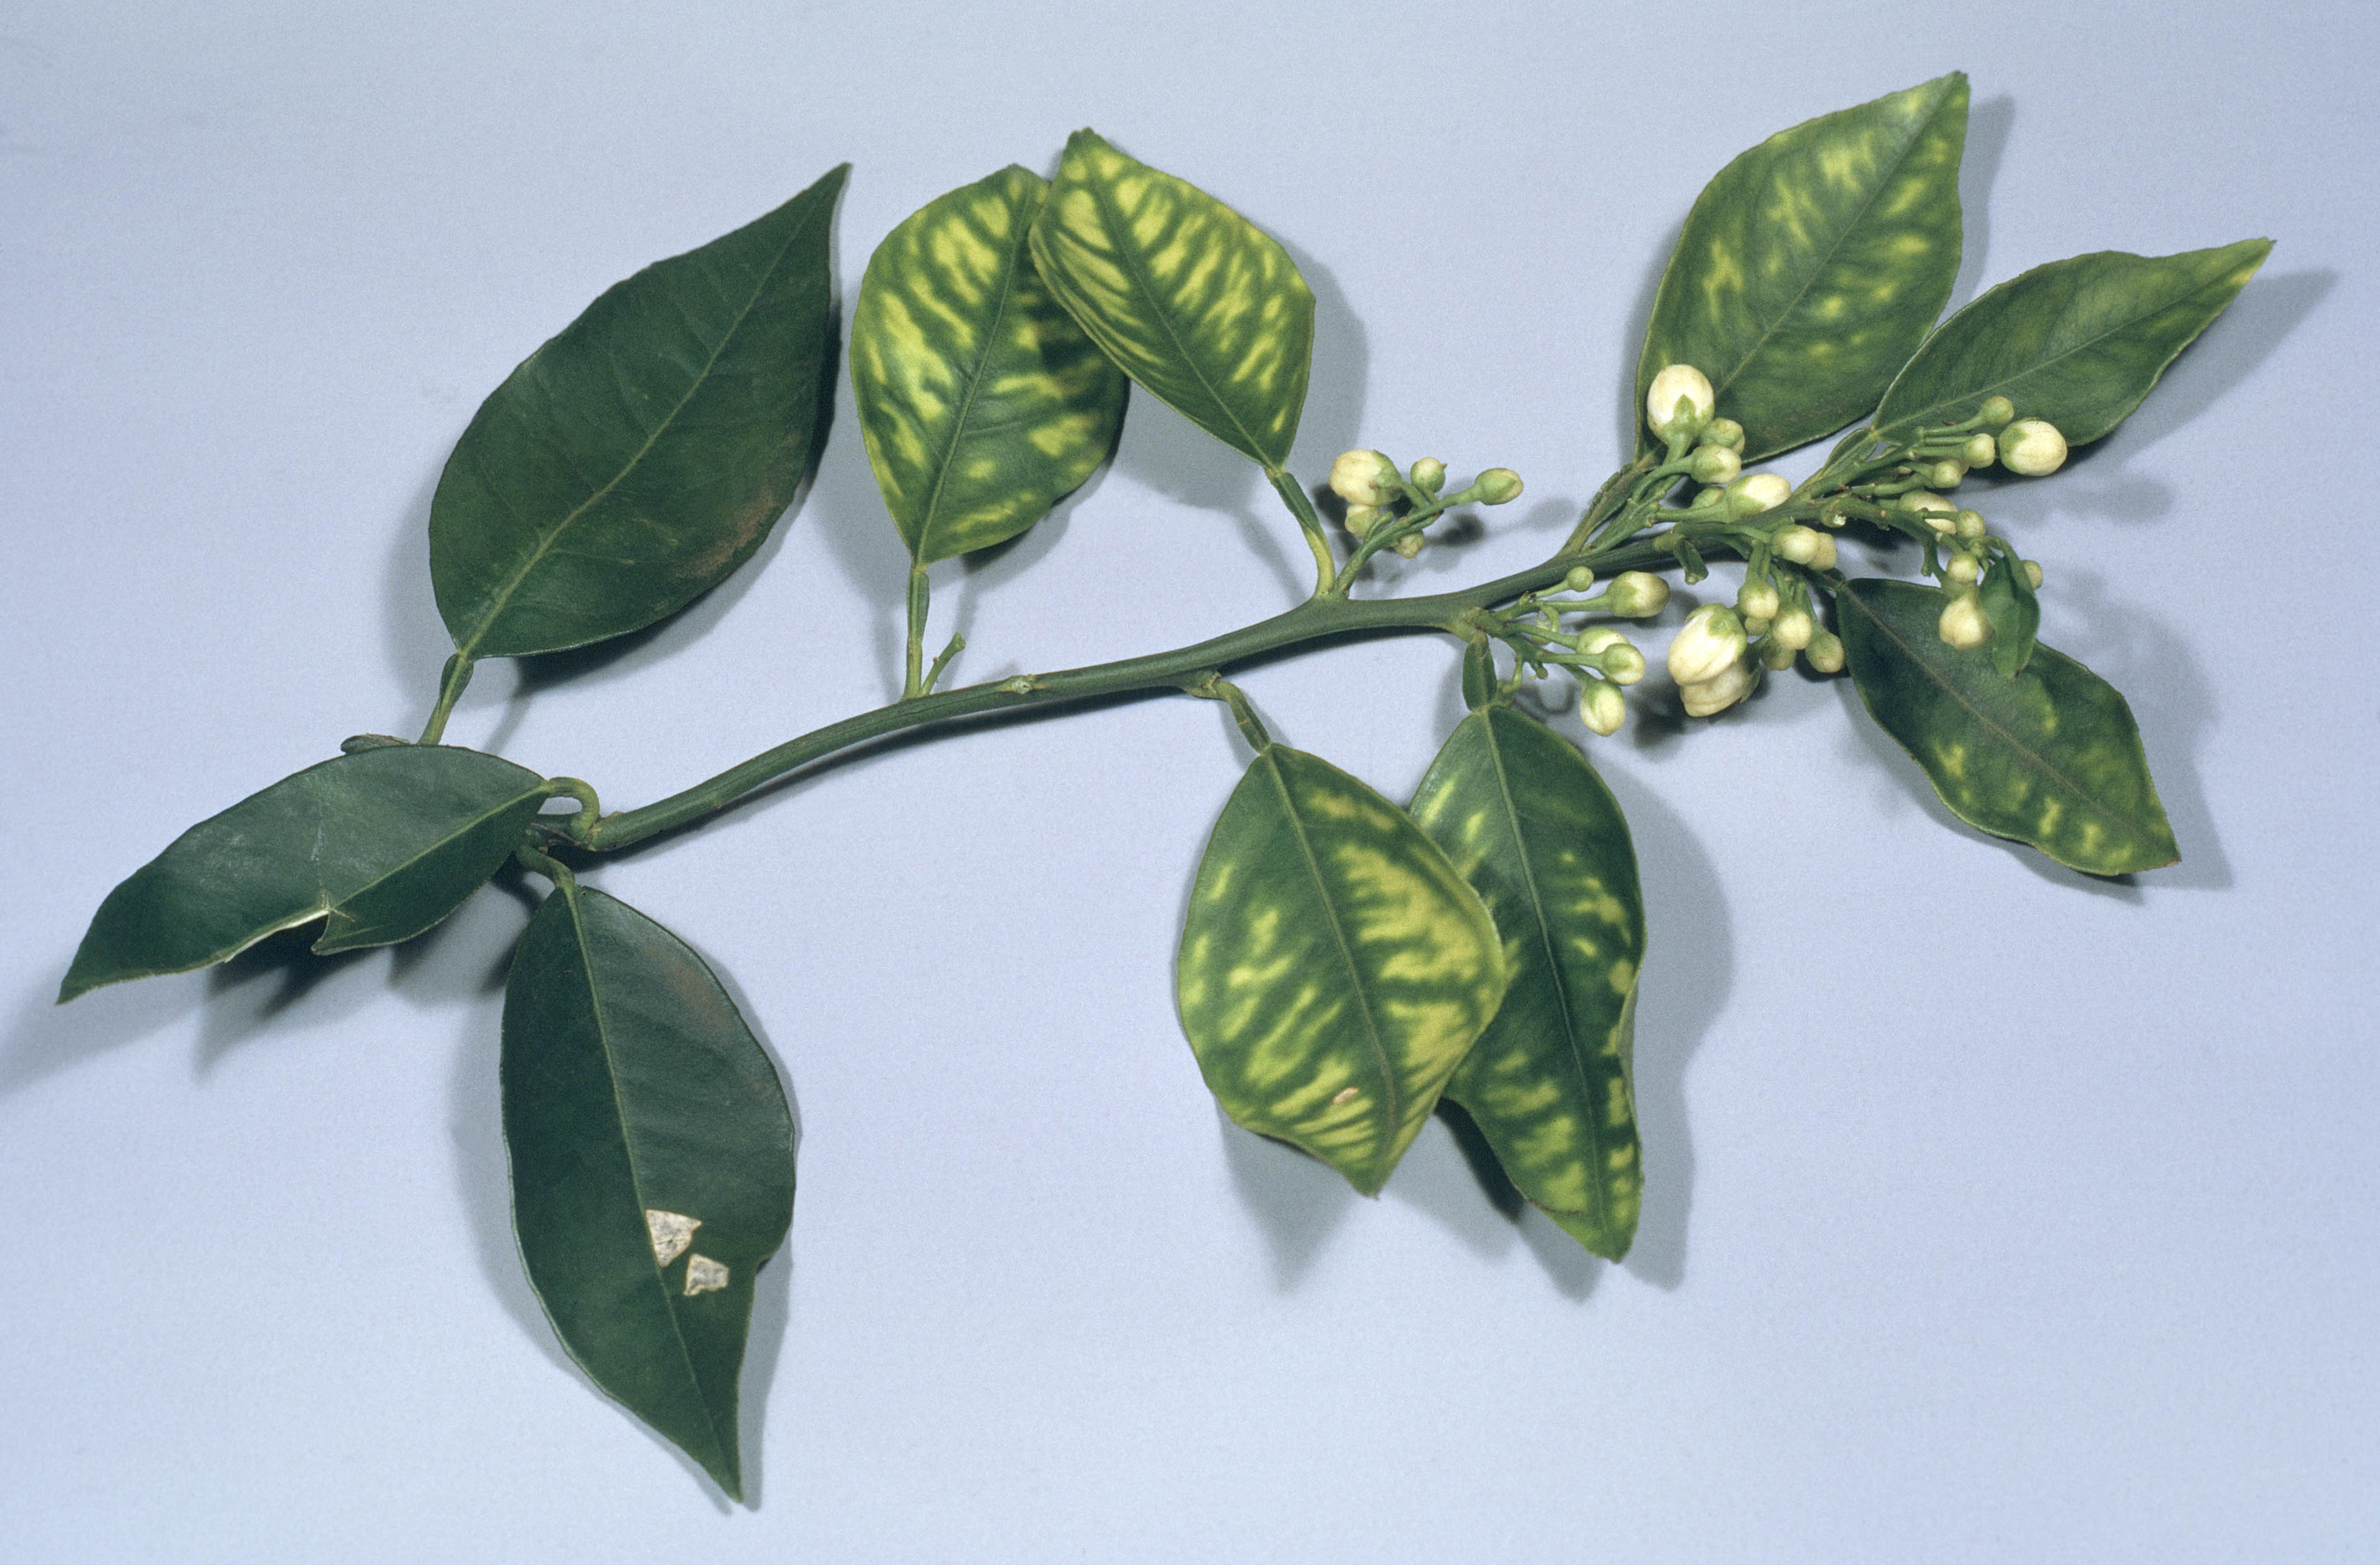 Figure 3. Leaves of zinc-deficient citrus are small, abnormally narrow and rather crowded on short stems, giving a bunched appearance.